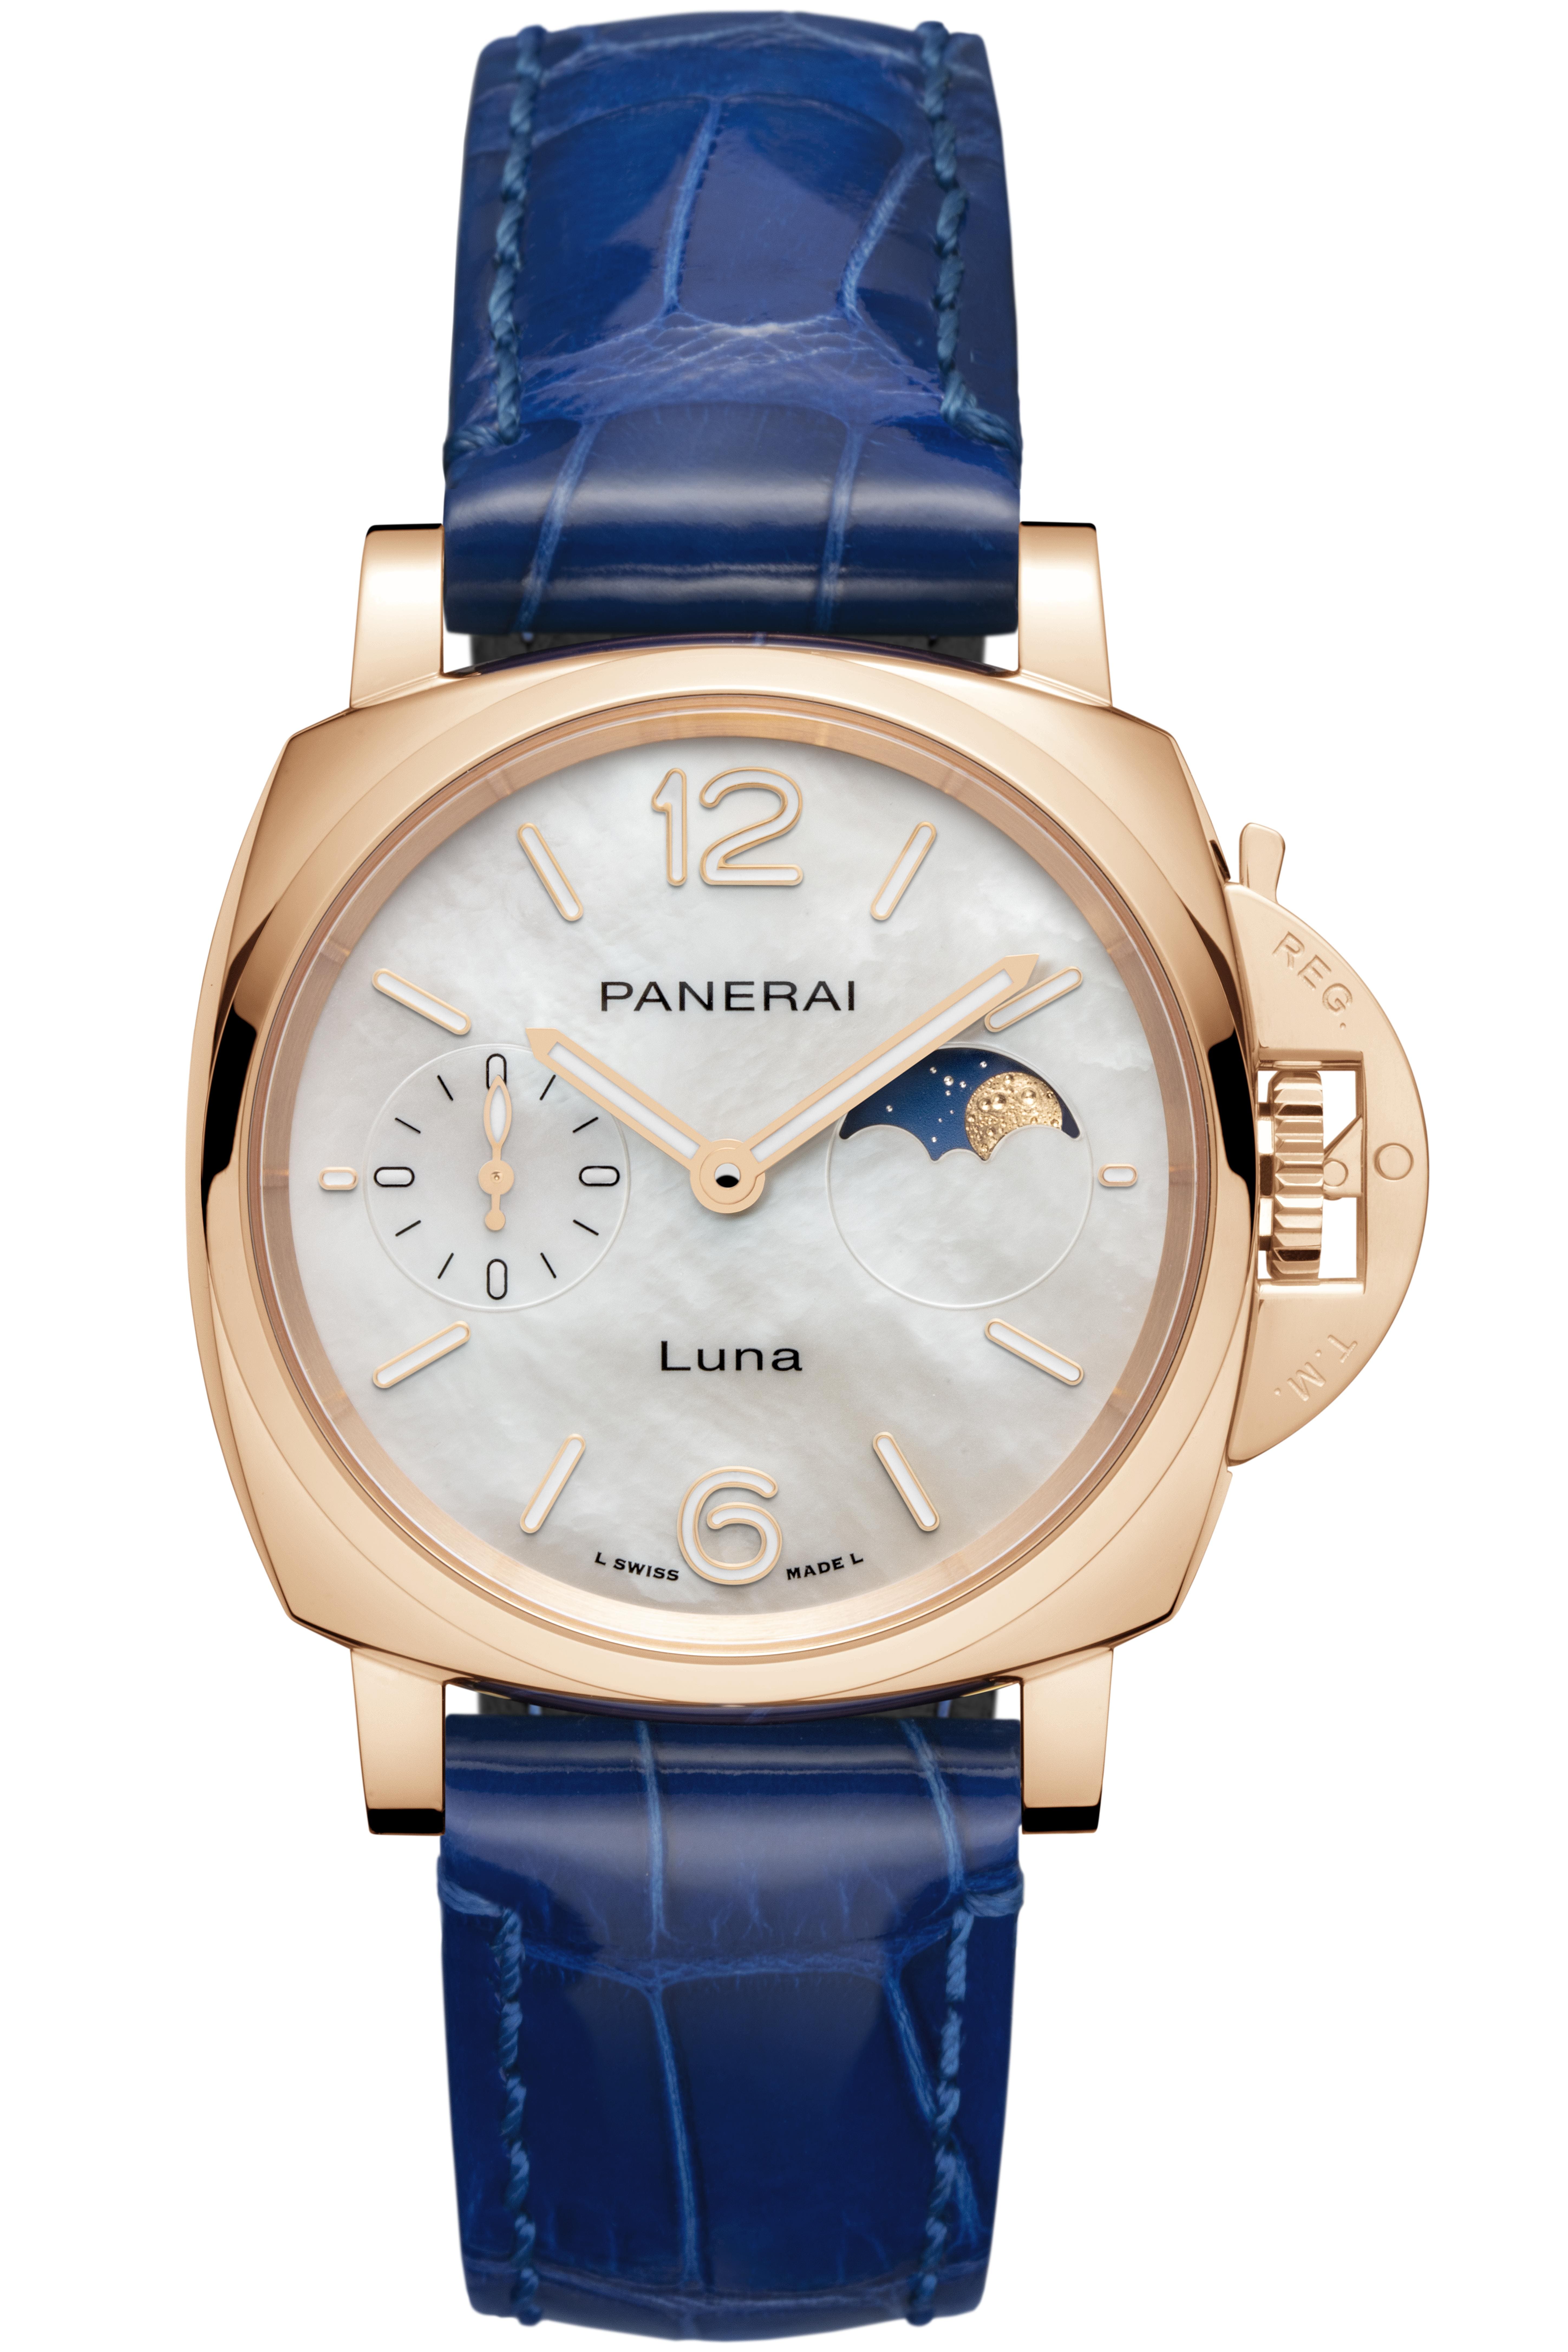 Timepieces from Panerai